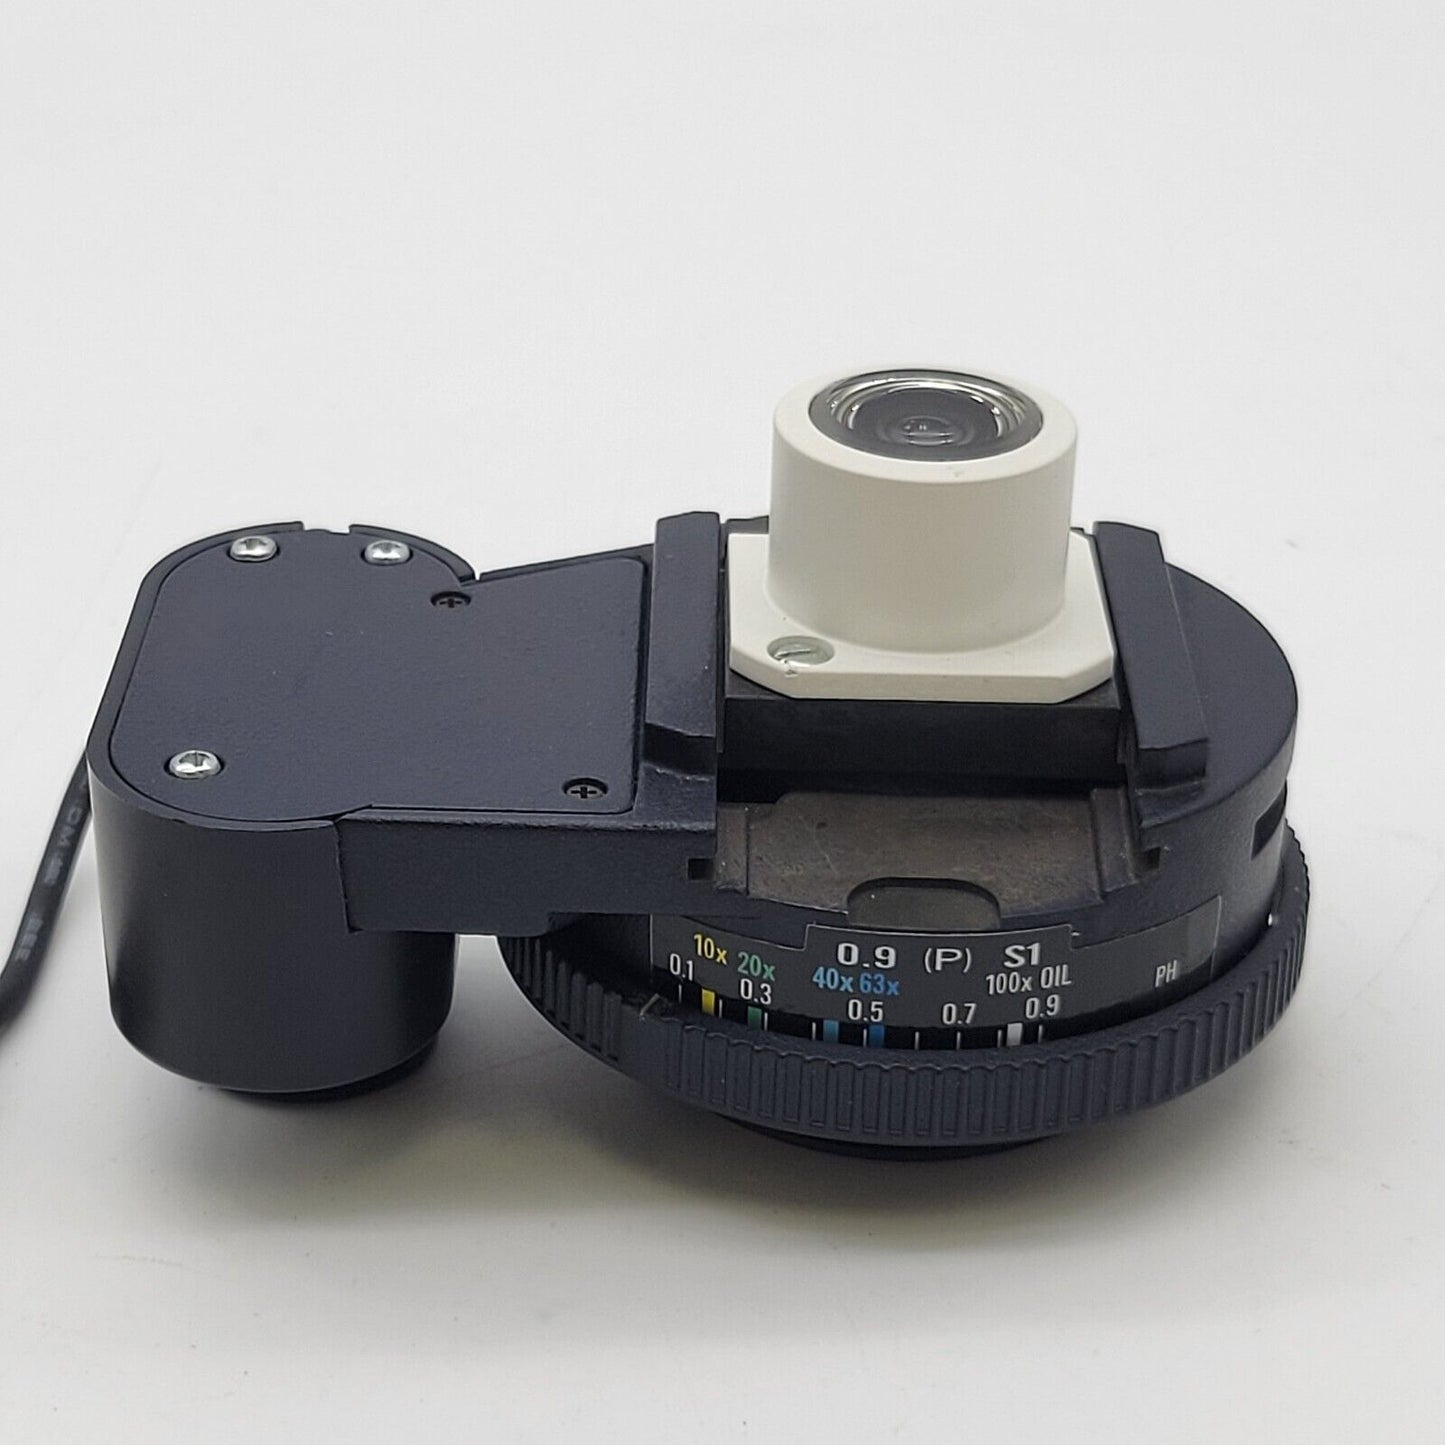 Leica Microscope Motorized Swing Out Condenser 11505198 DM3000 - microscopemarketplace